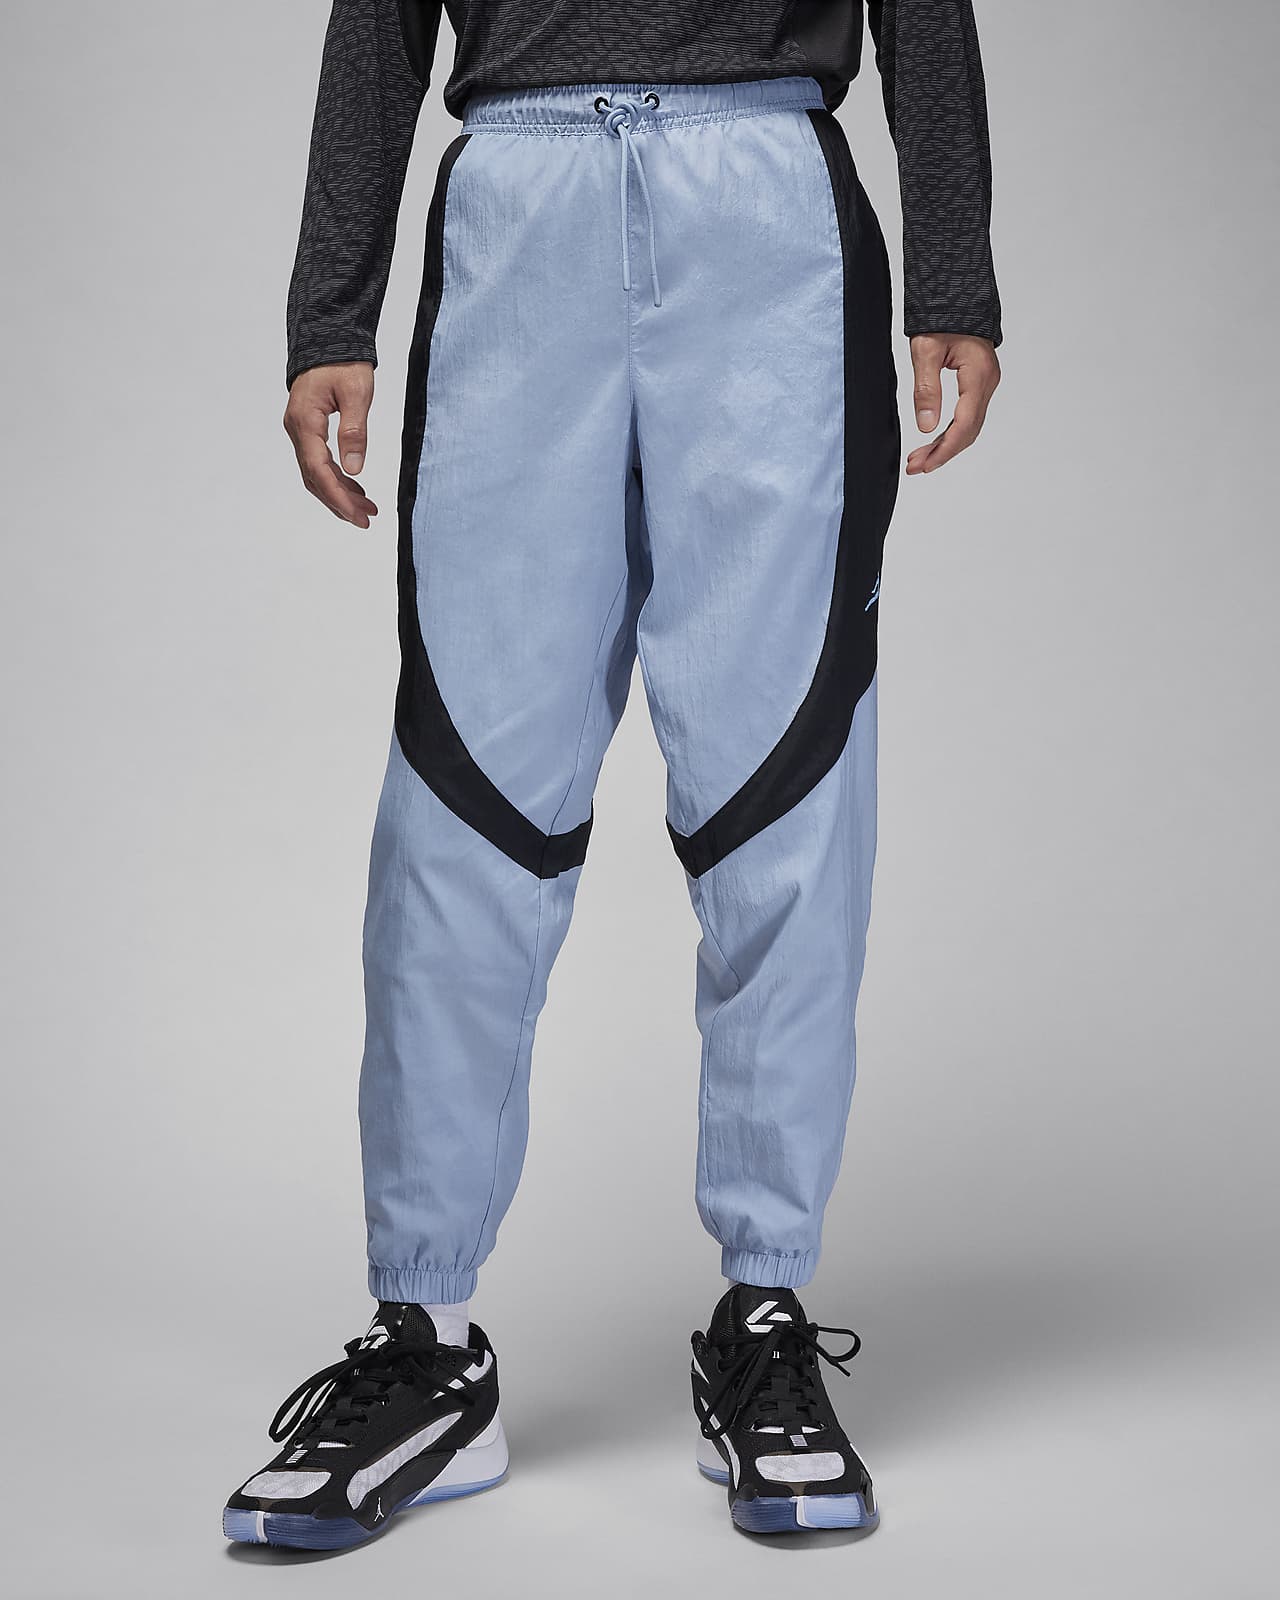 Trackpants: Shop Online Men Airforce Blue Polyester Trackpants on Cliths